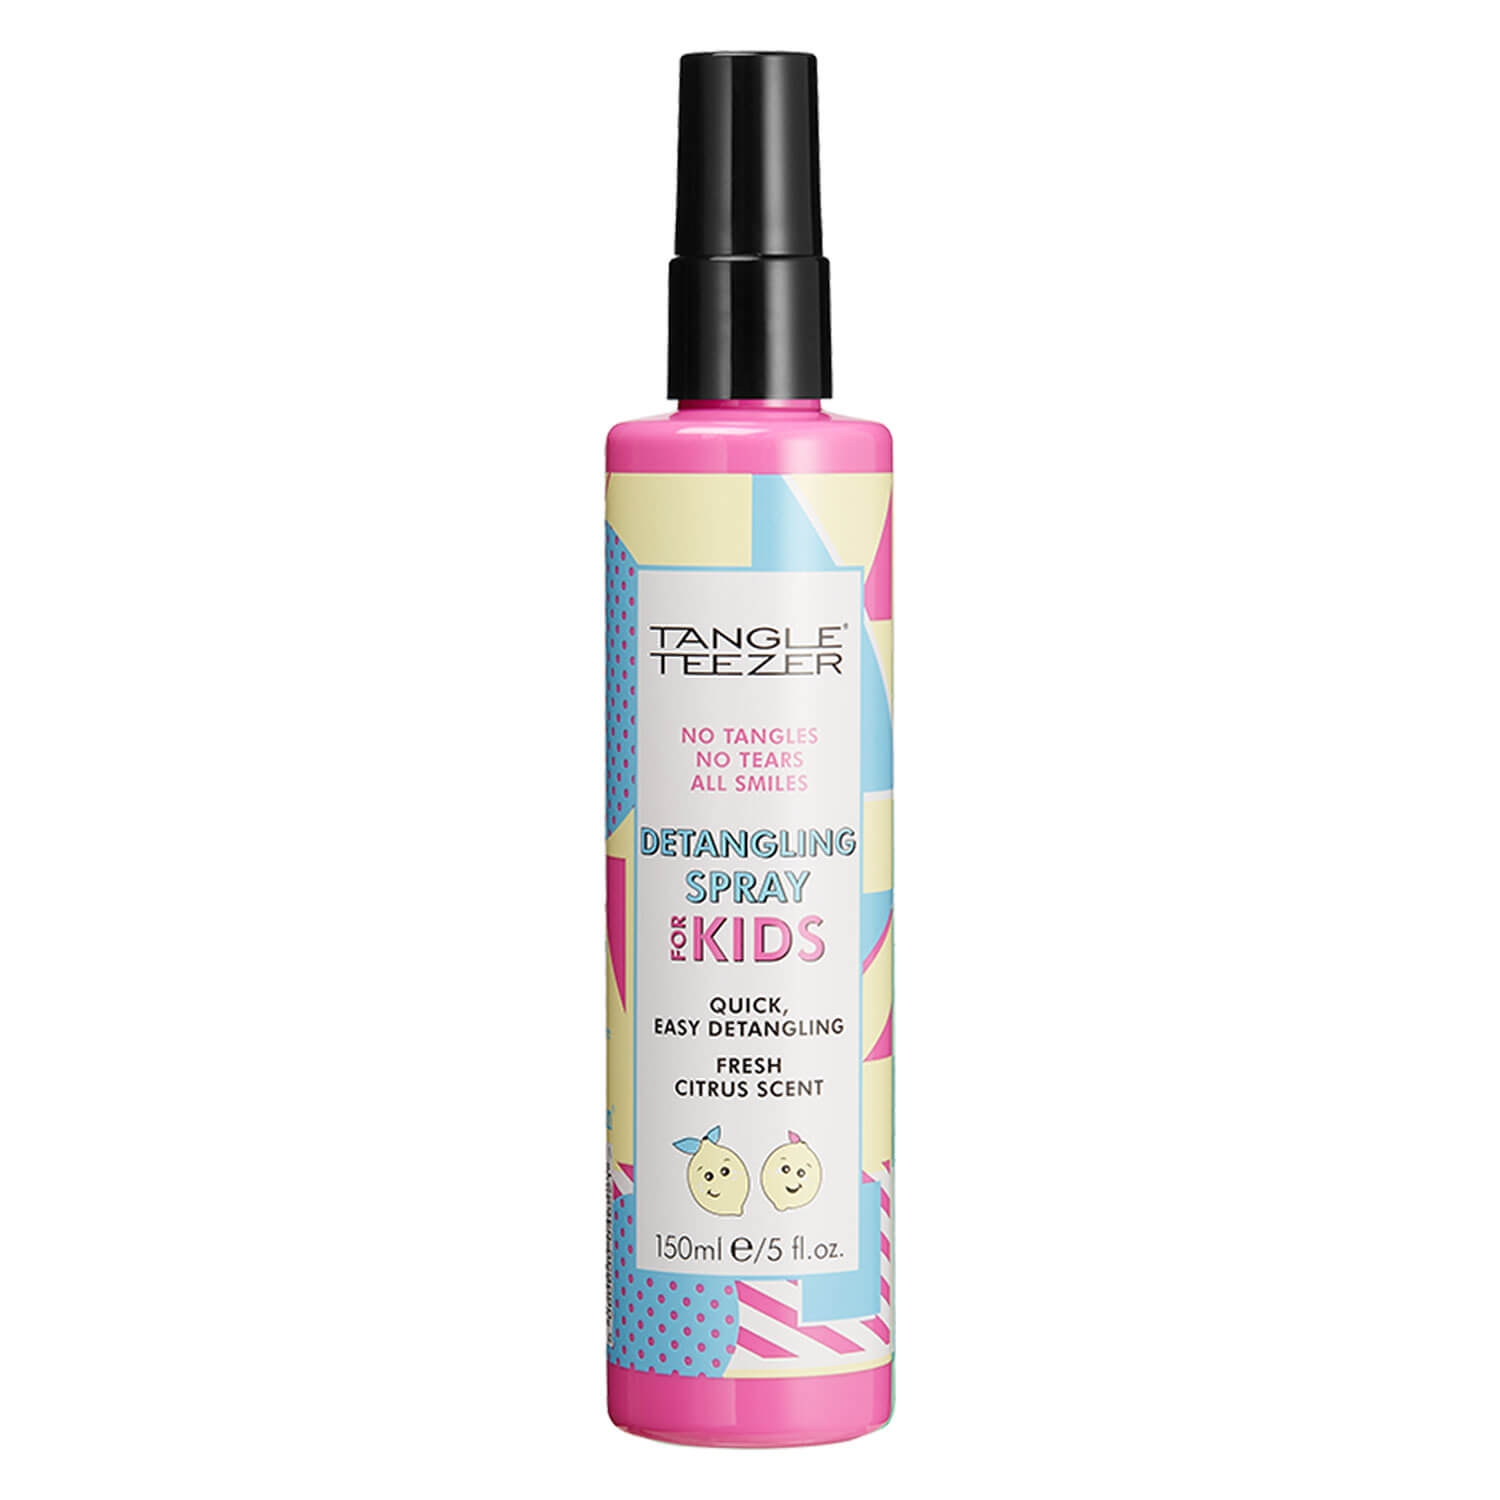 Product image from Tangle Teezer - Detangling Spray Kids